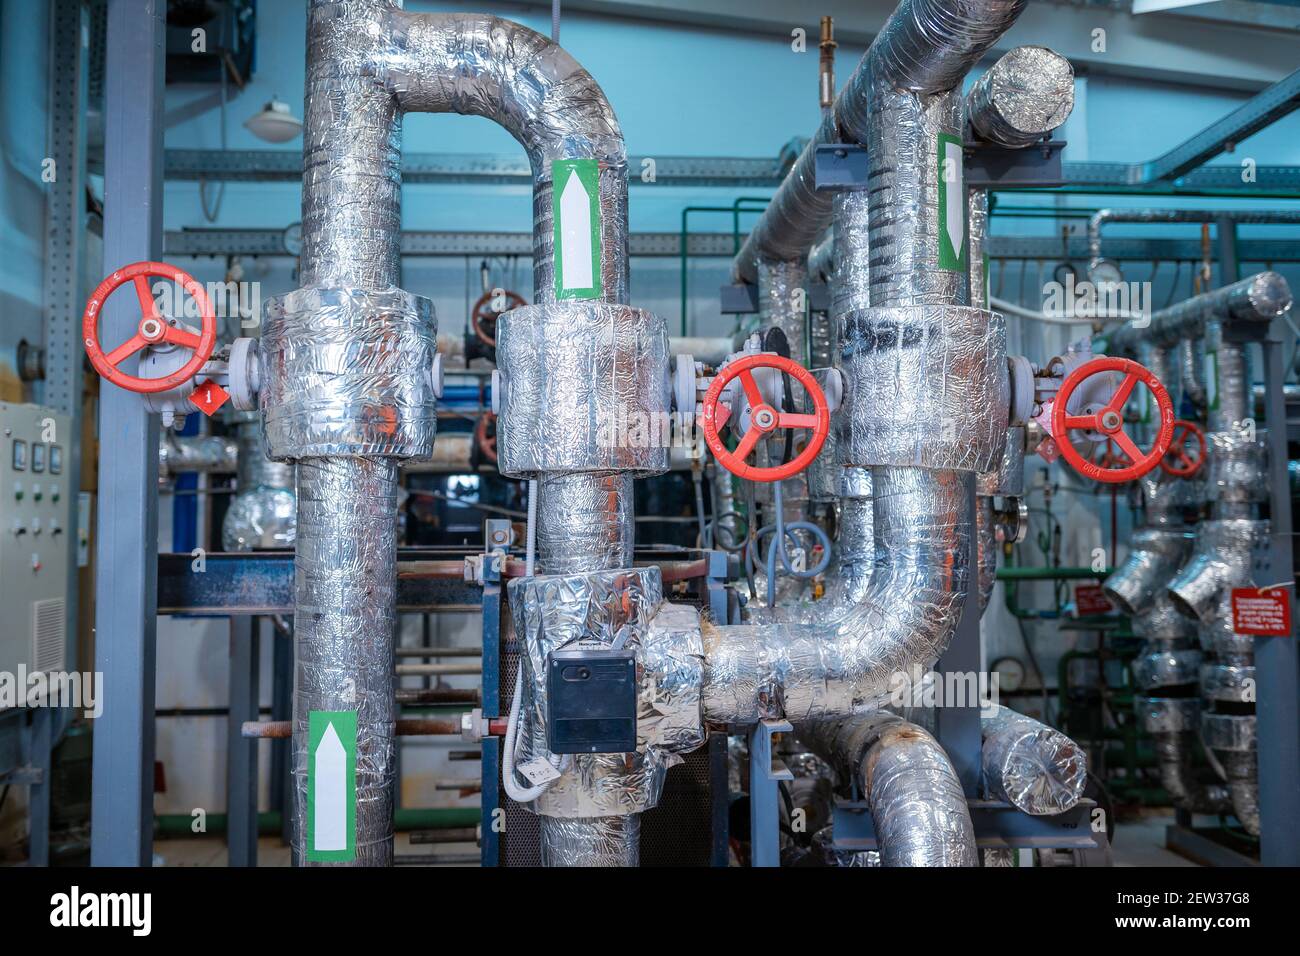 Industrial heating pipes. Red vents on the pipes. The concept of industrialization. Stock Photo